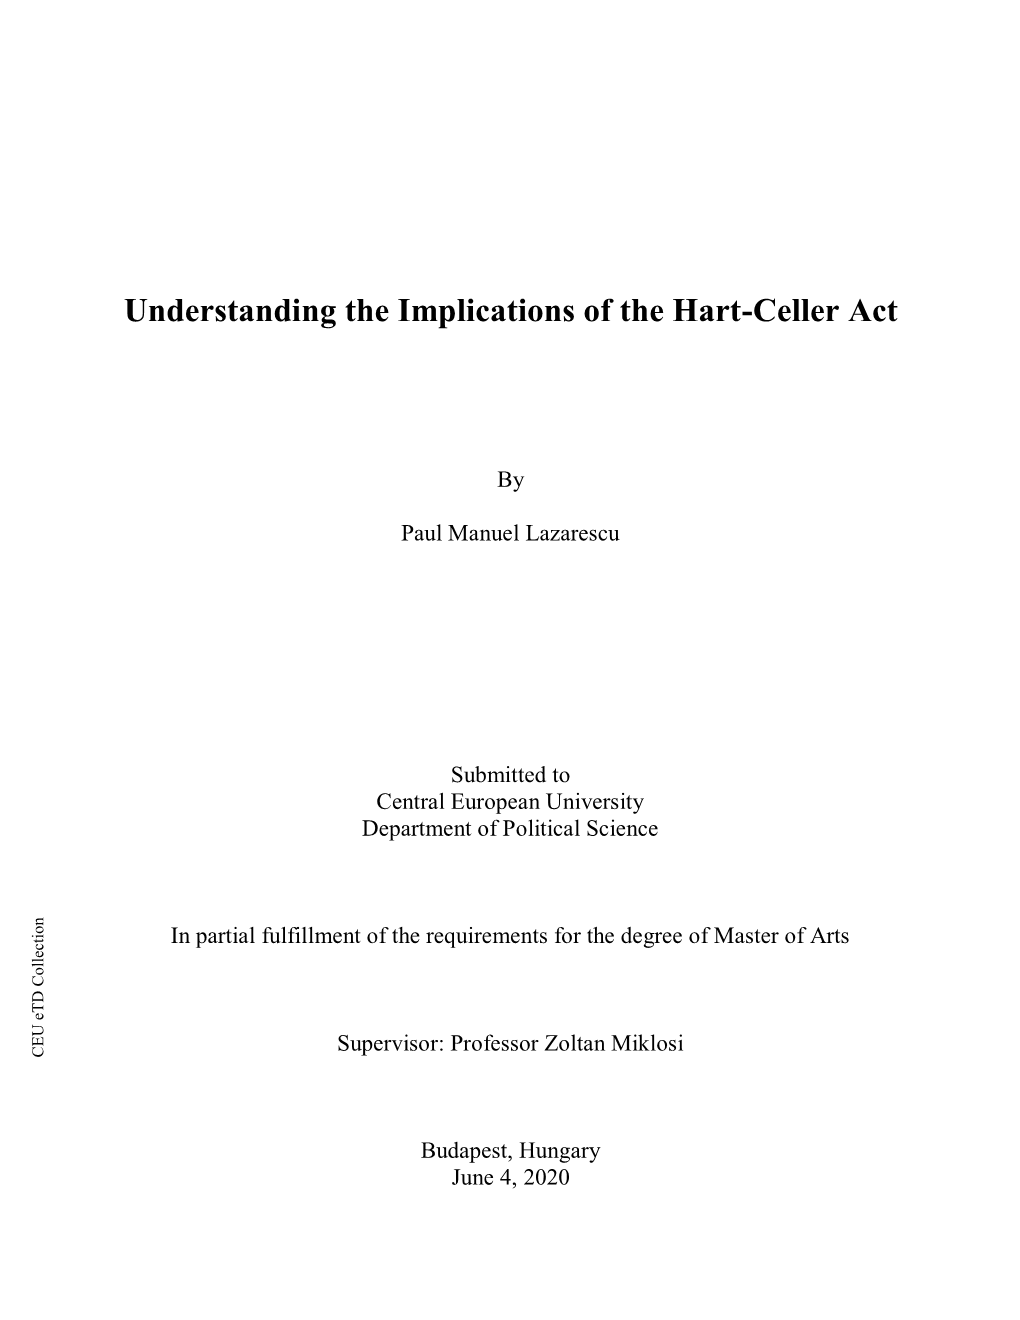 Understanding the Implications of the Hart-Celler Act